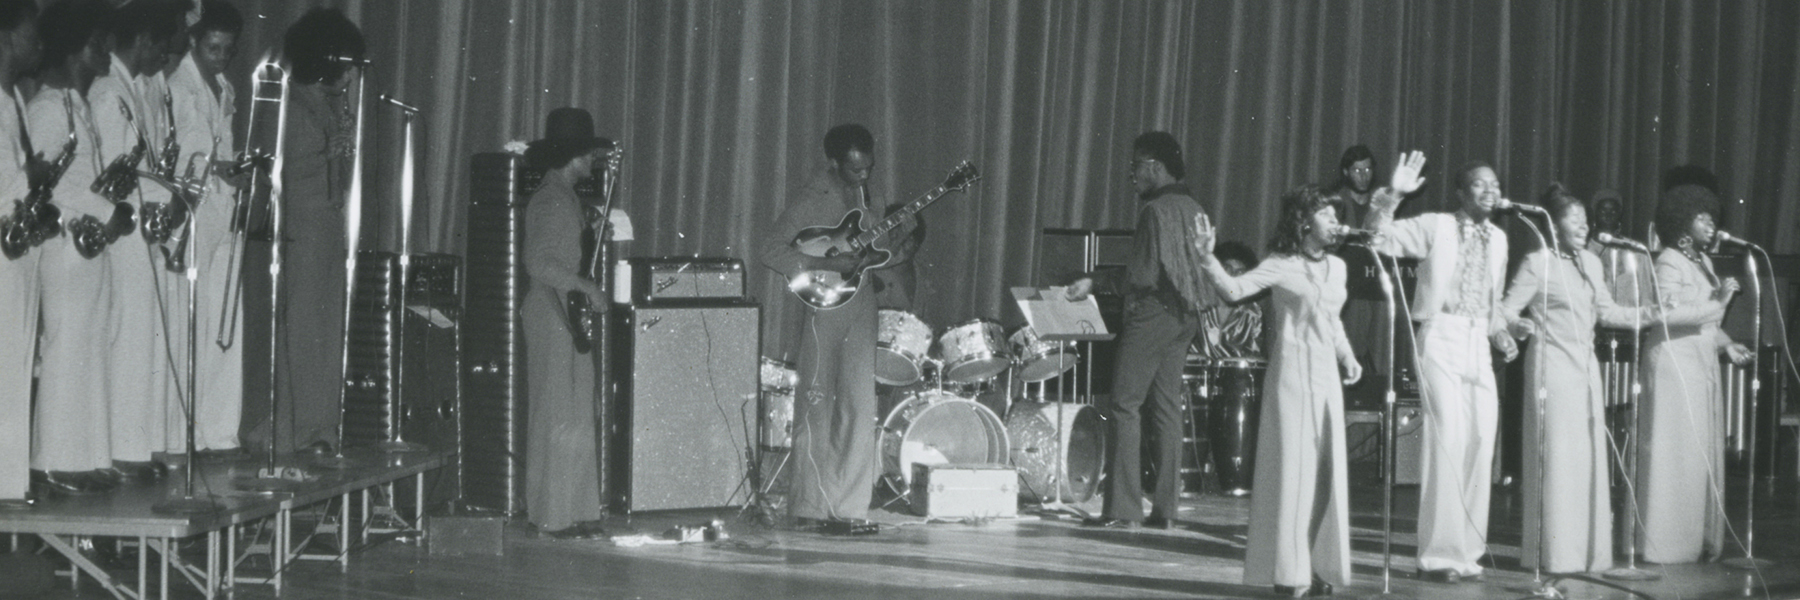 A vintage image of the IU Soul Revue performing